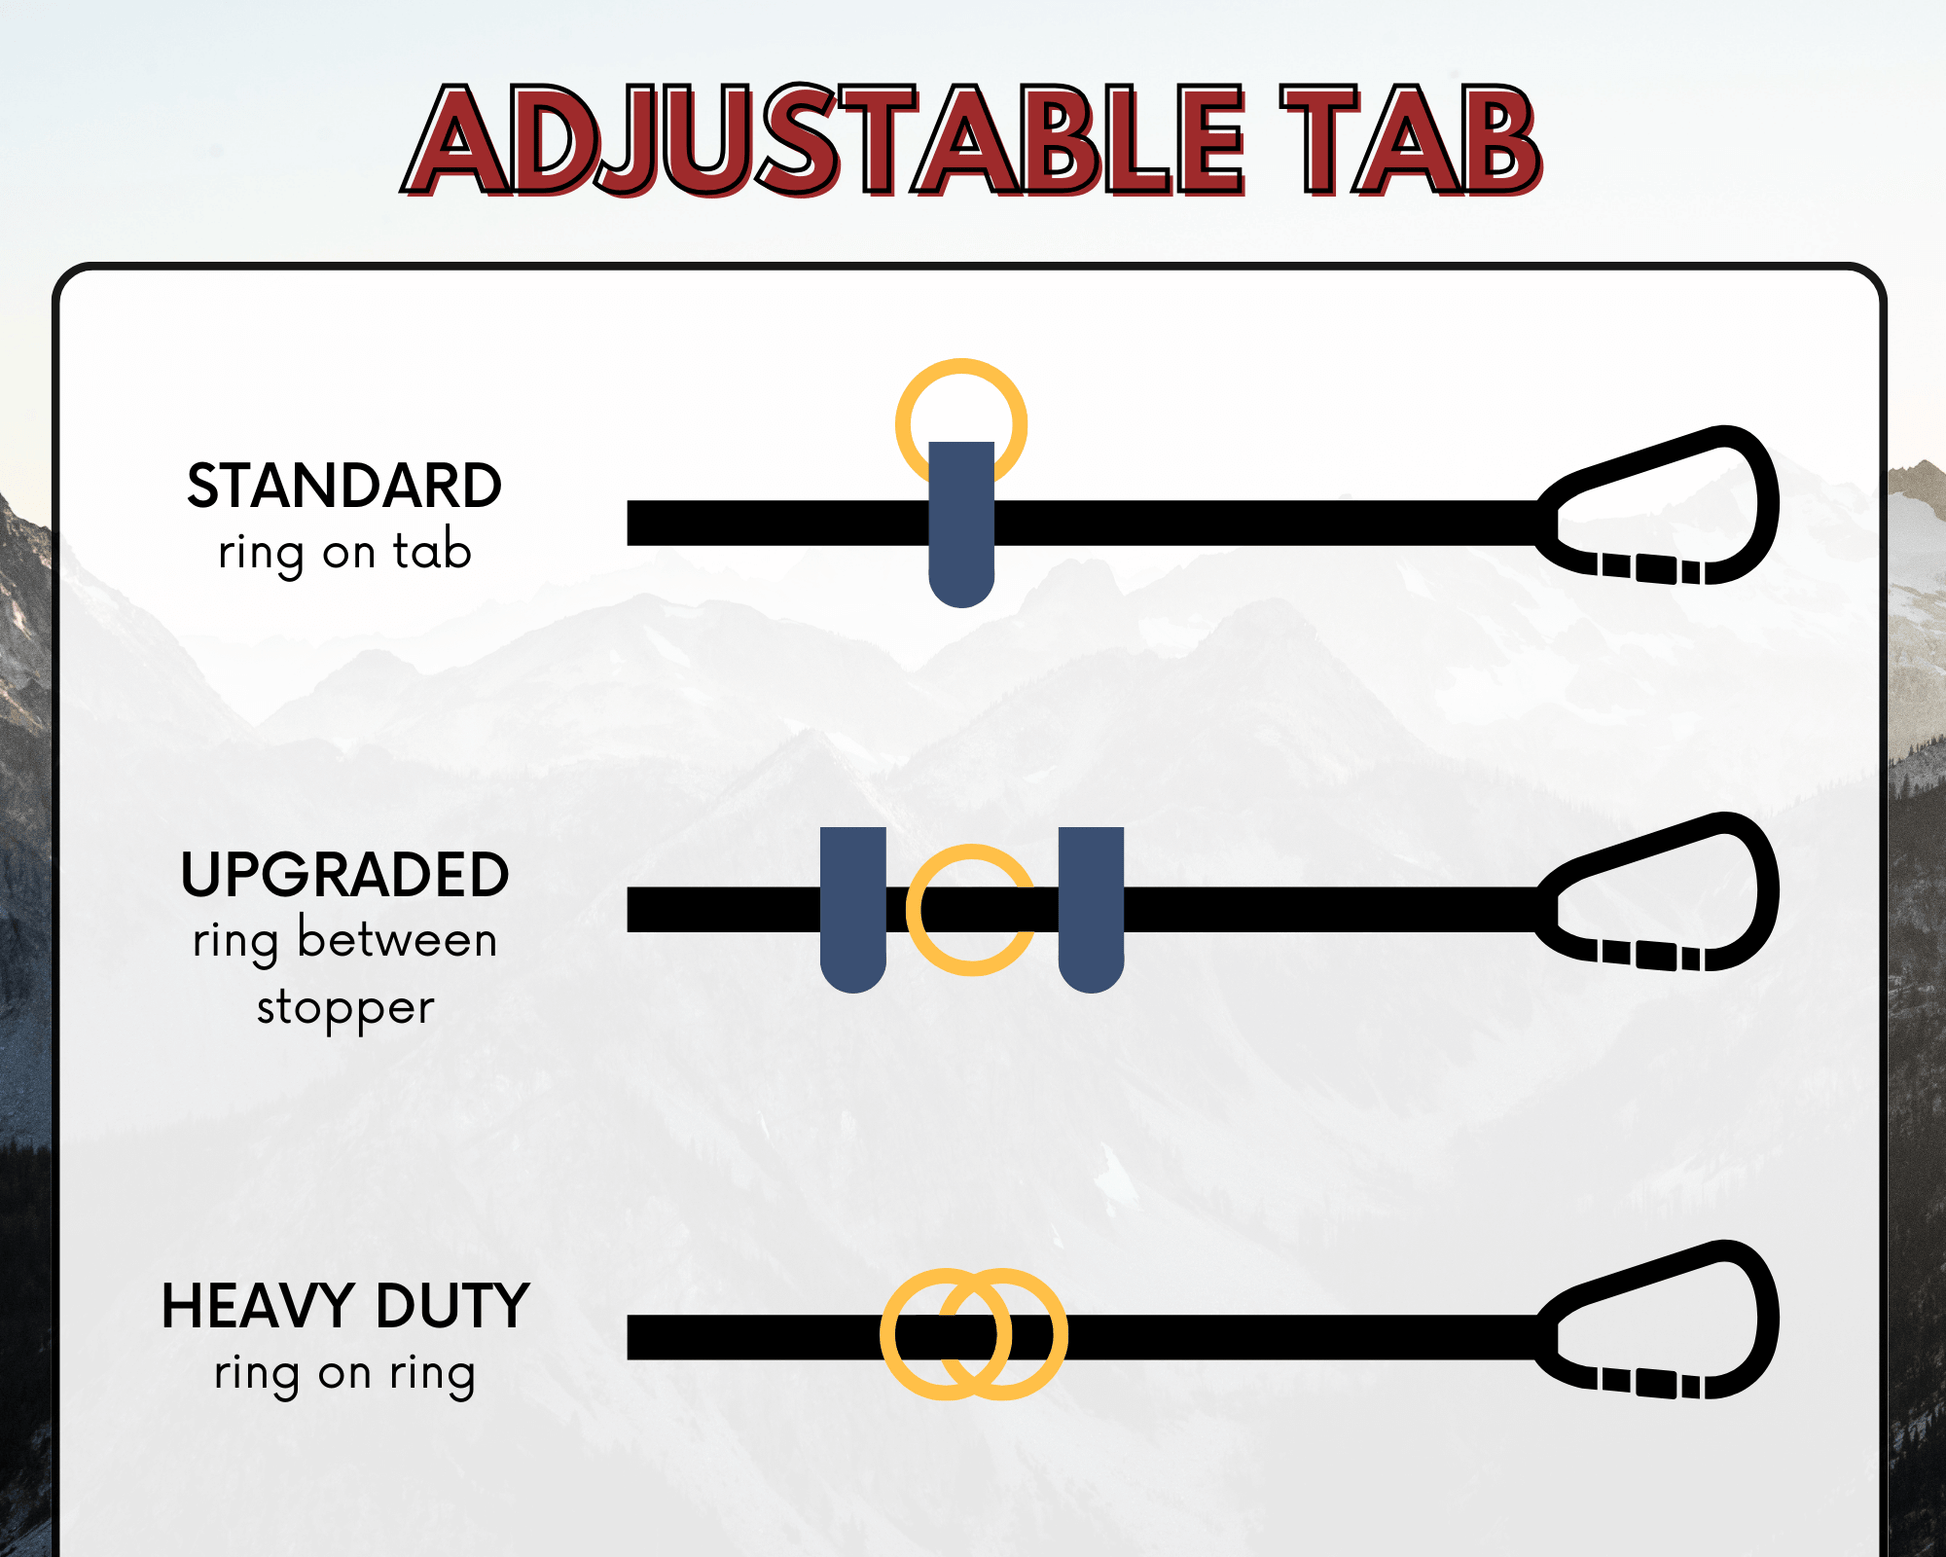 various adjustable tab types displayed as an infographic.